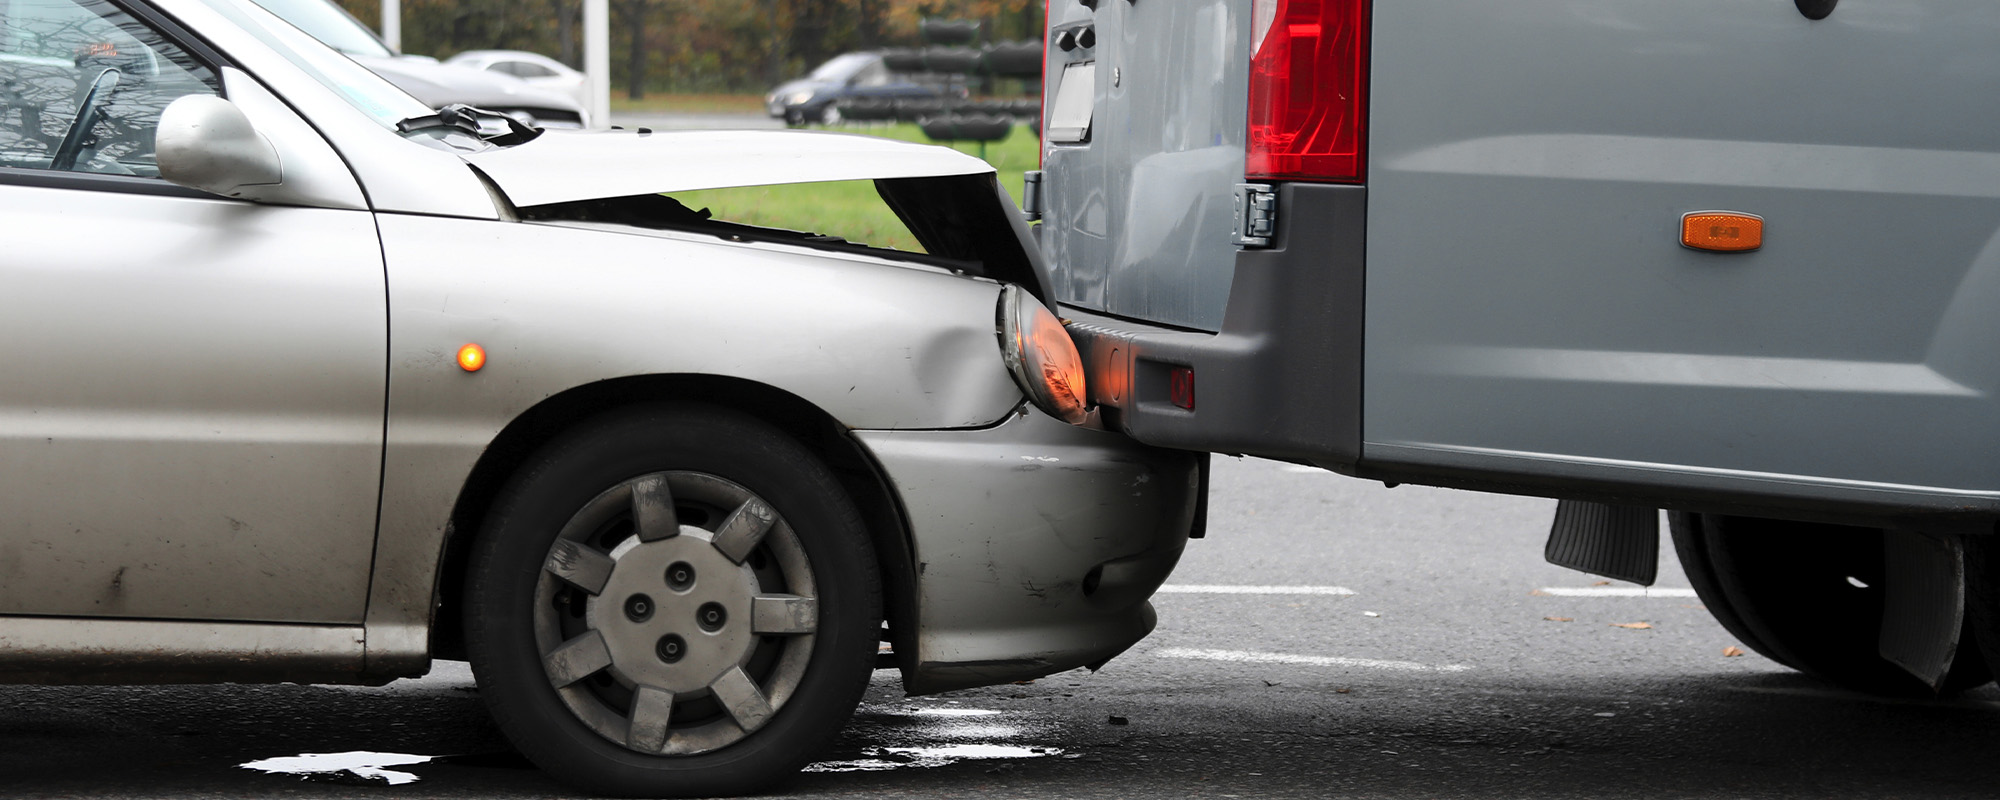 Why Should You Hire a Car Accident Lawyer Arizona